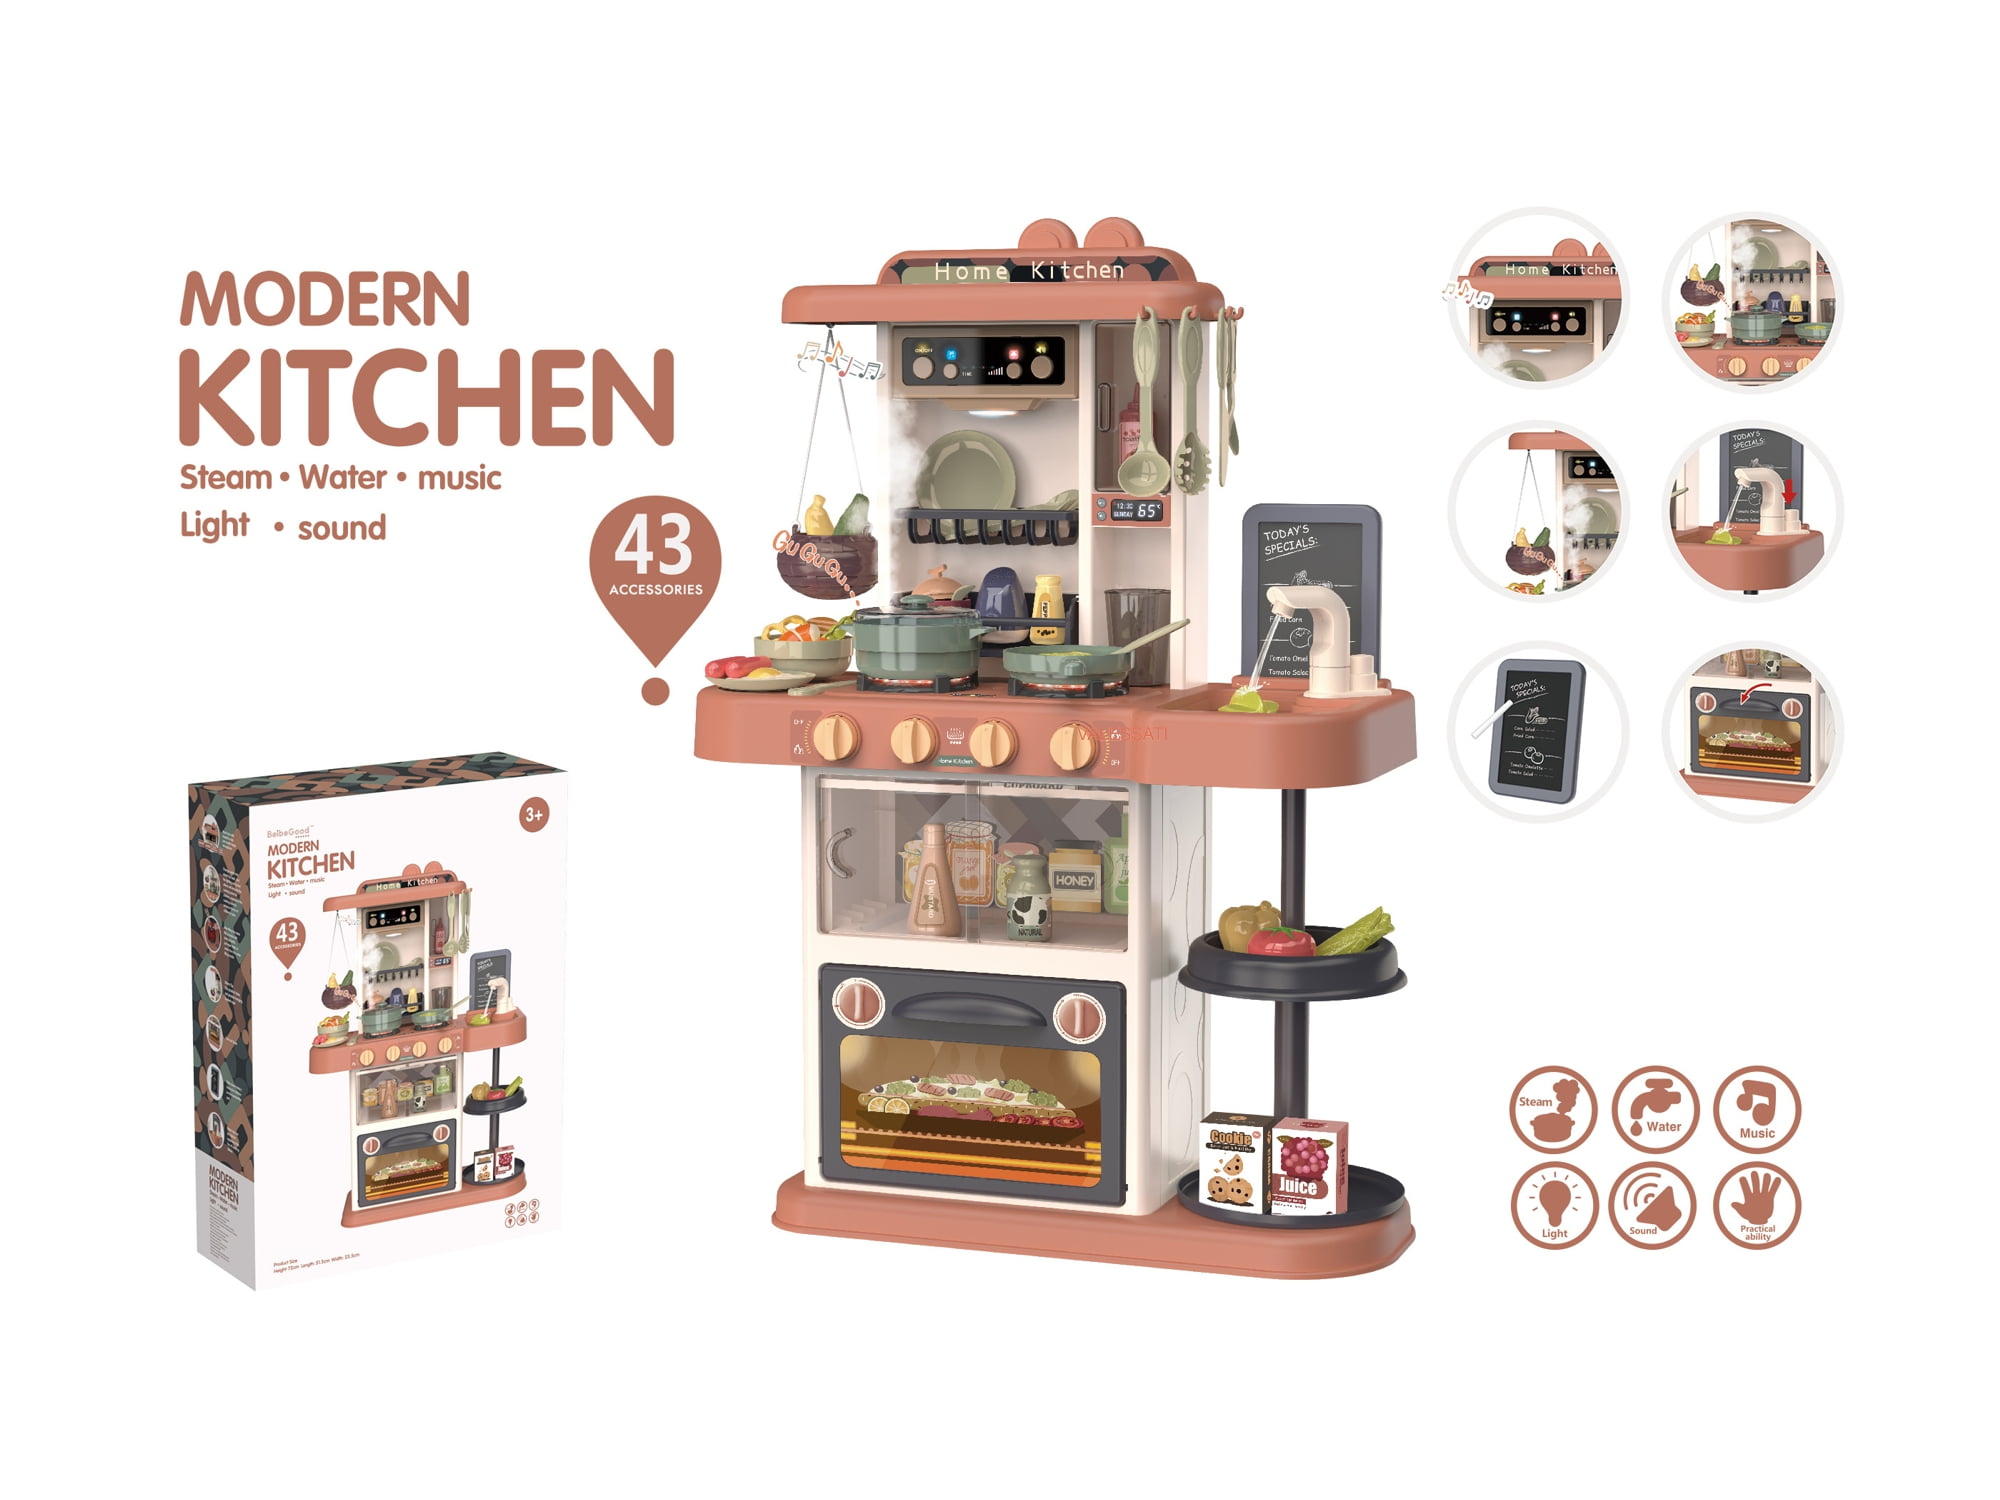 Kitchen Set Toy for Kids 43 Pc New Model Pretend Play Cook, Light Steam,  Water Features by VALESSATI